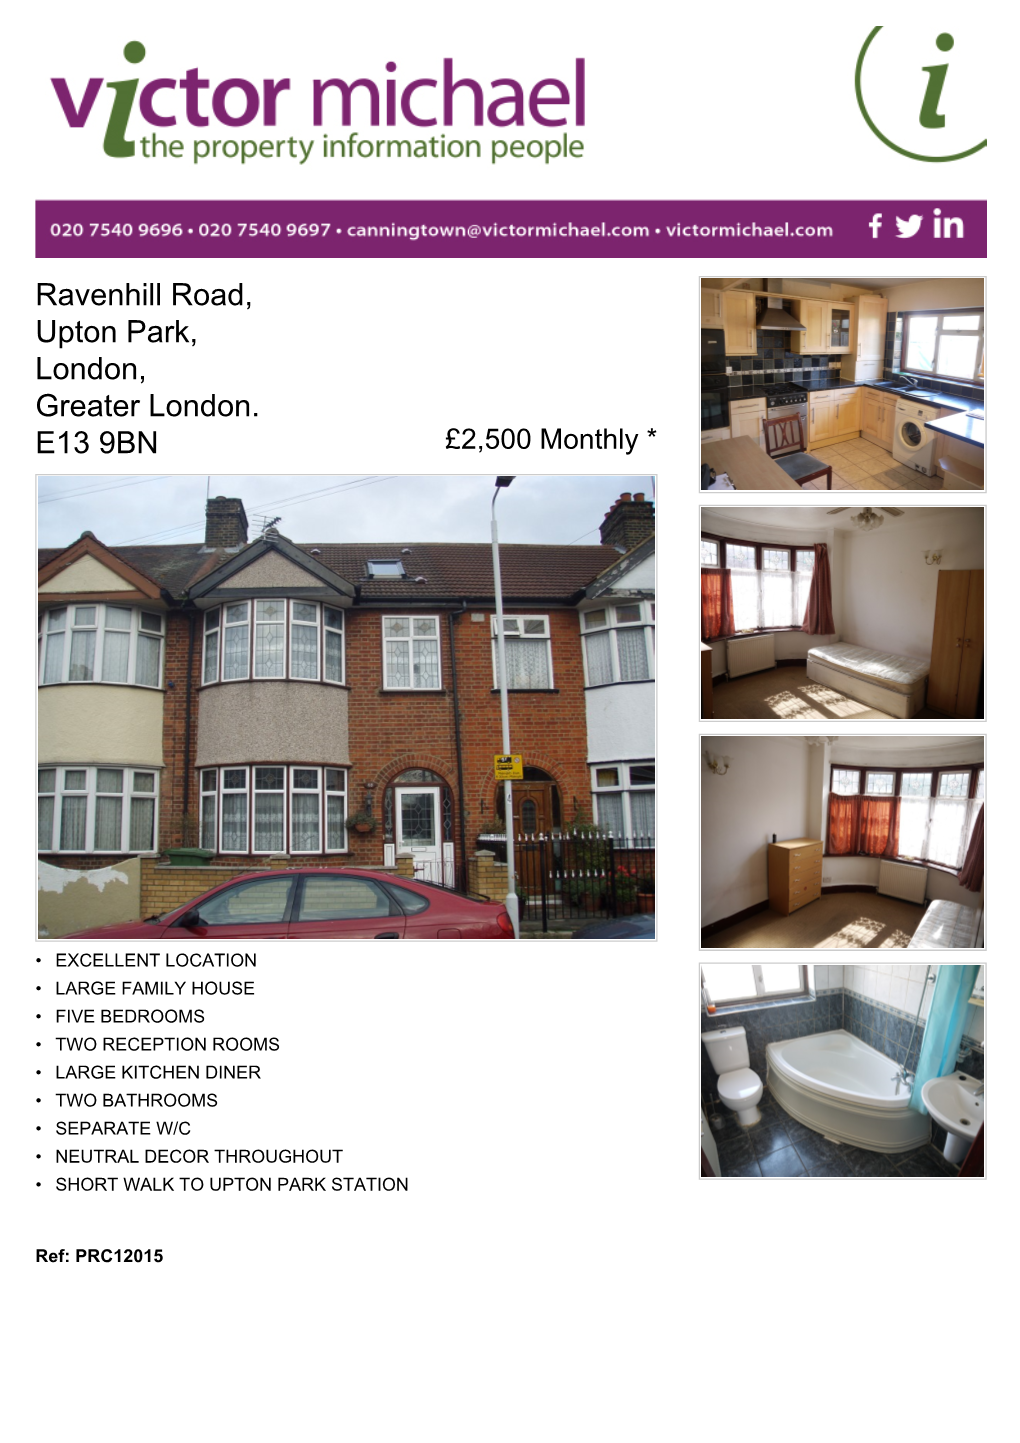 Ravenhill Road, Upton Park, London, Greater London. E13 9BN £2,500 Monthly *